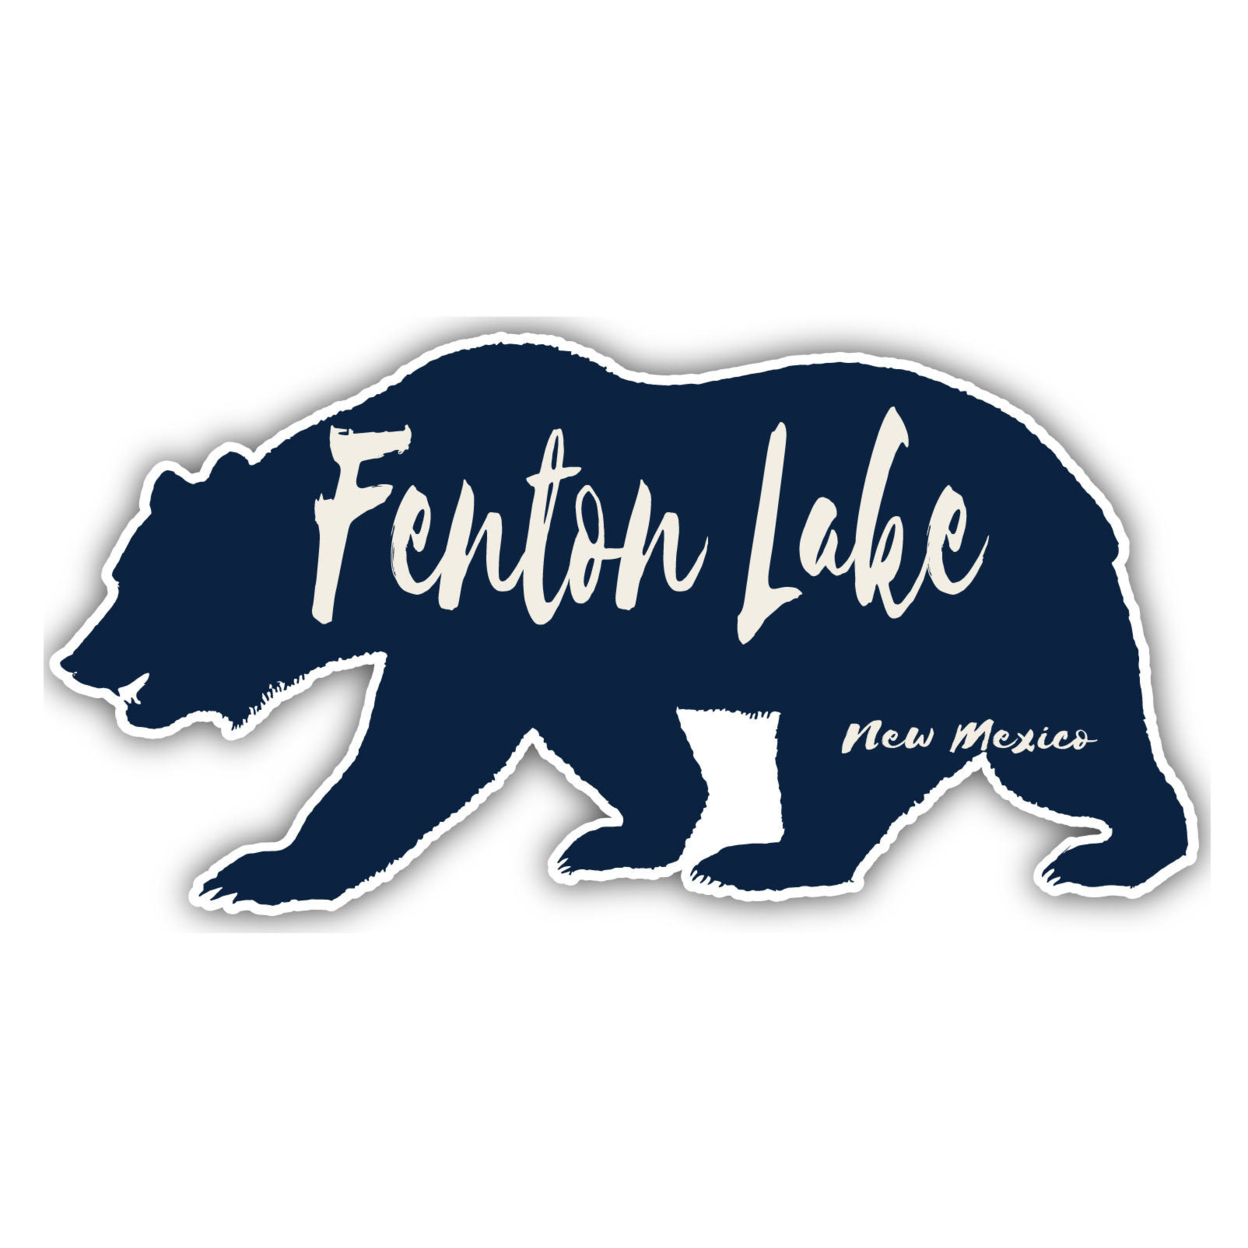 Fenton Lake New Mexico Souvenir Decorative Stickers (Choose Theme And Size) - 4-Pack, 10-Inch, Bear